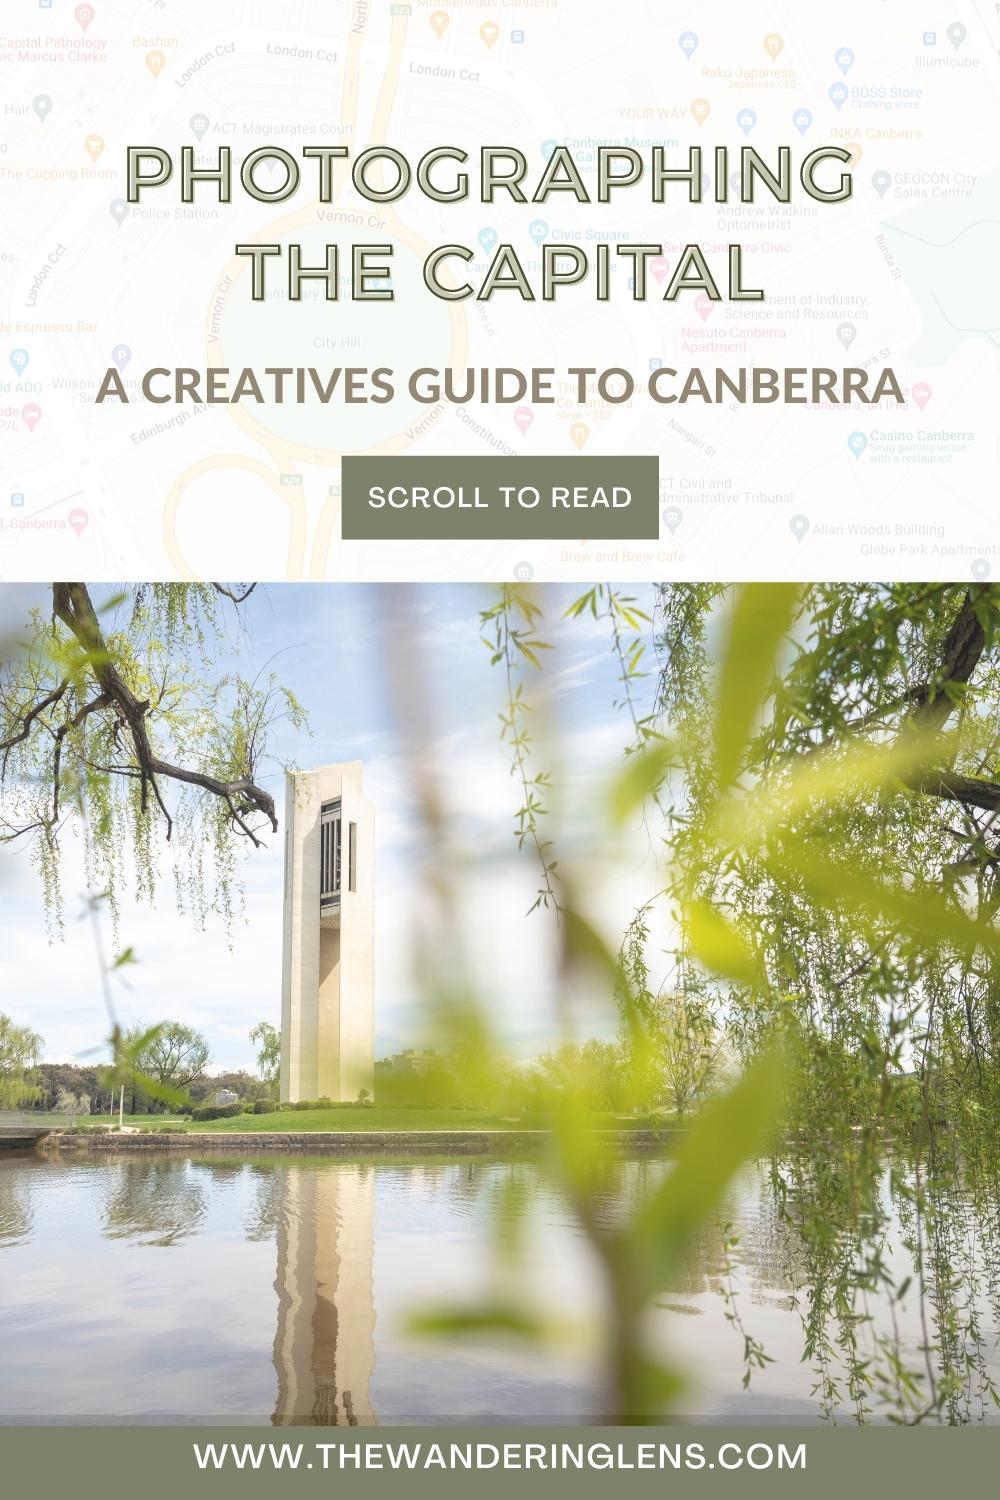 A Travel Guide to Canberra for Creatives and Photographers